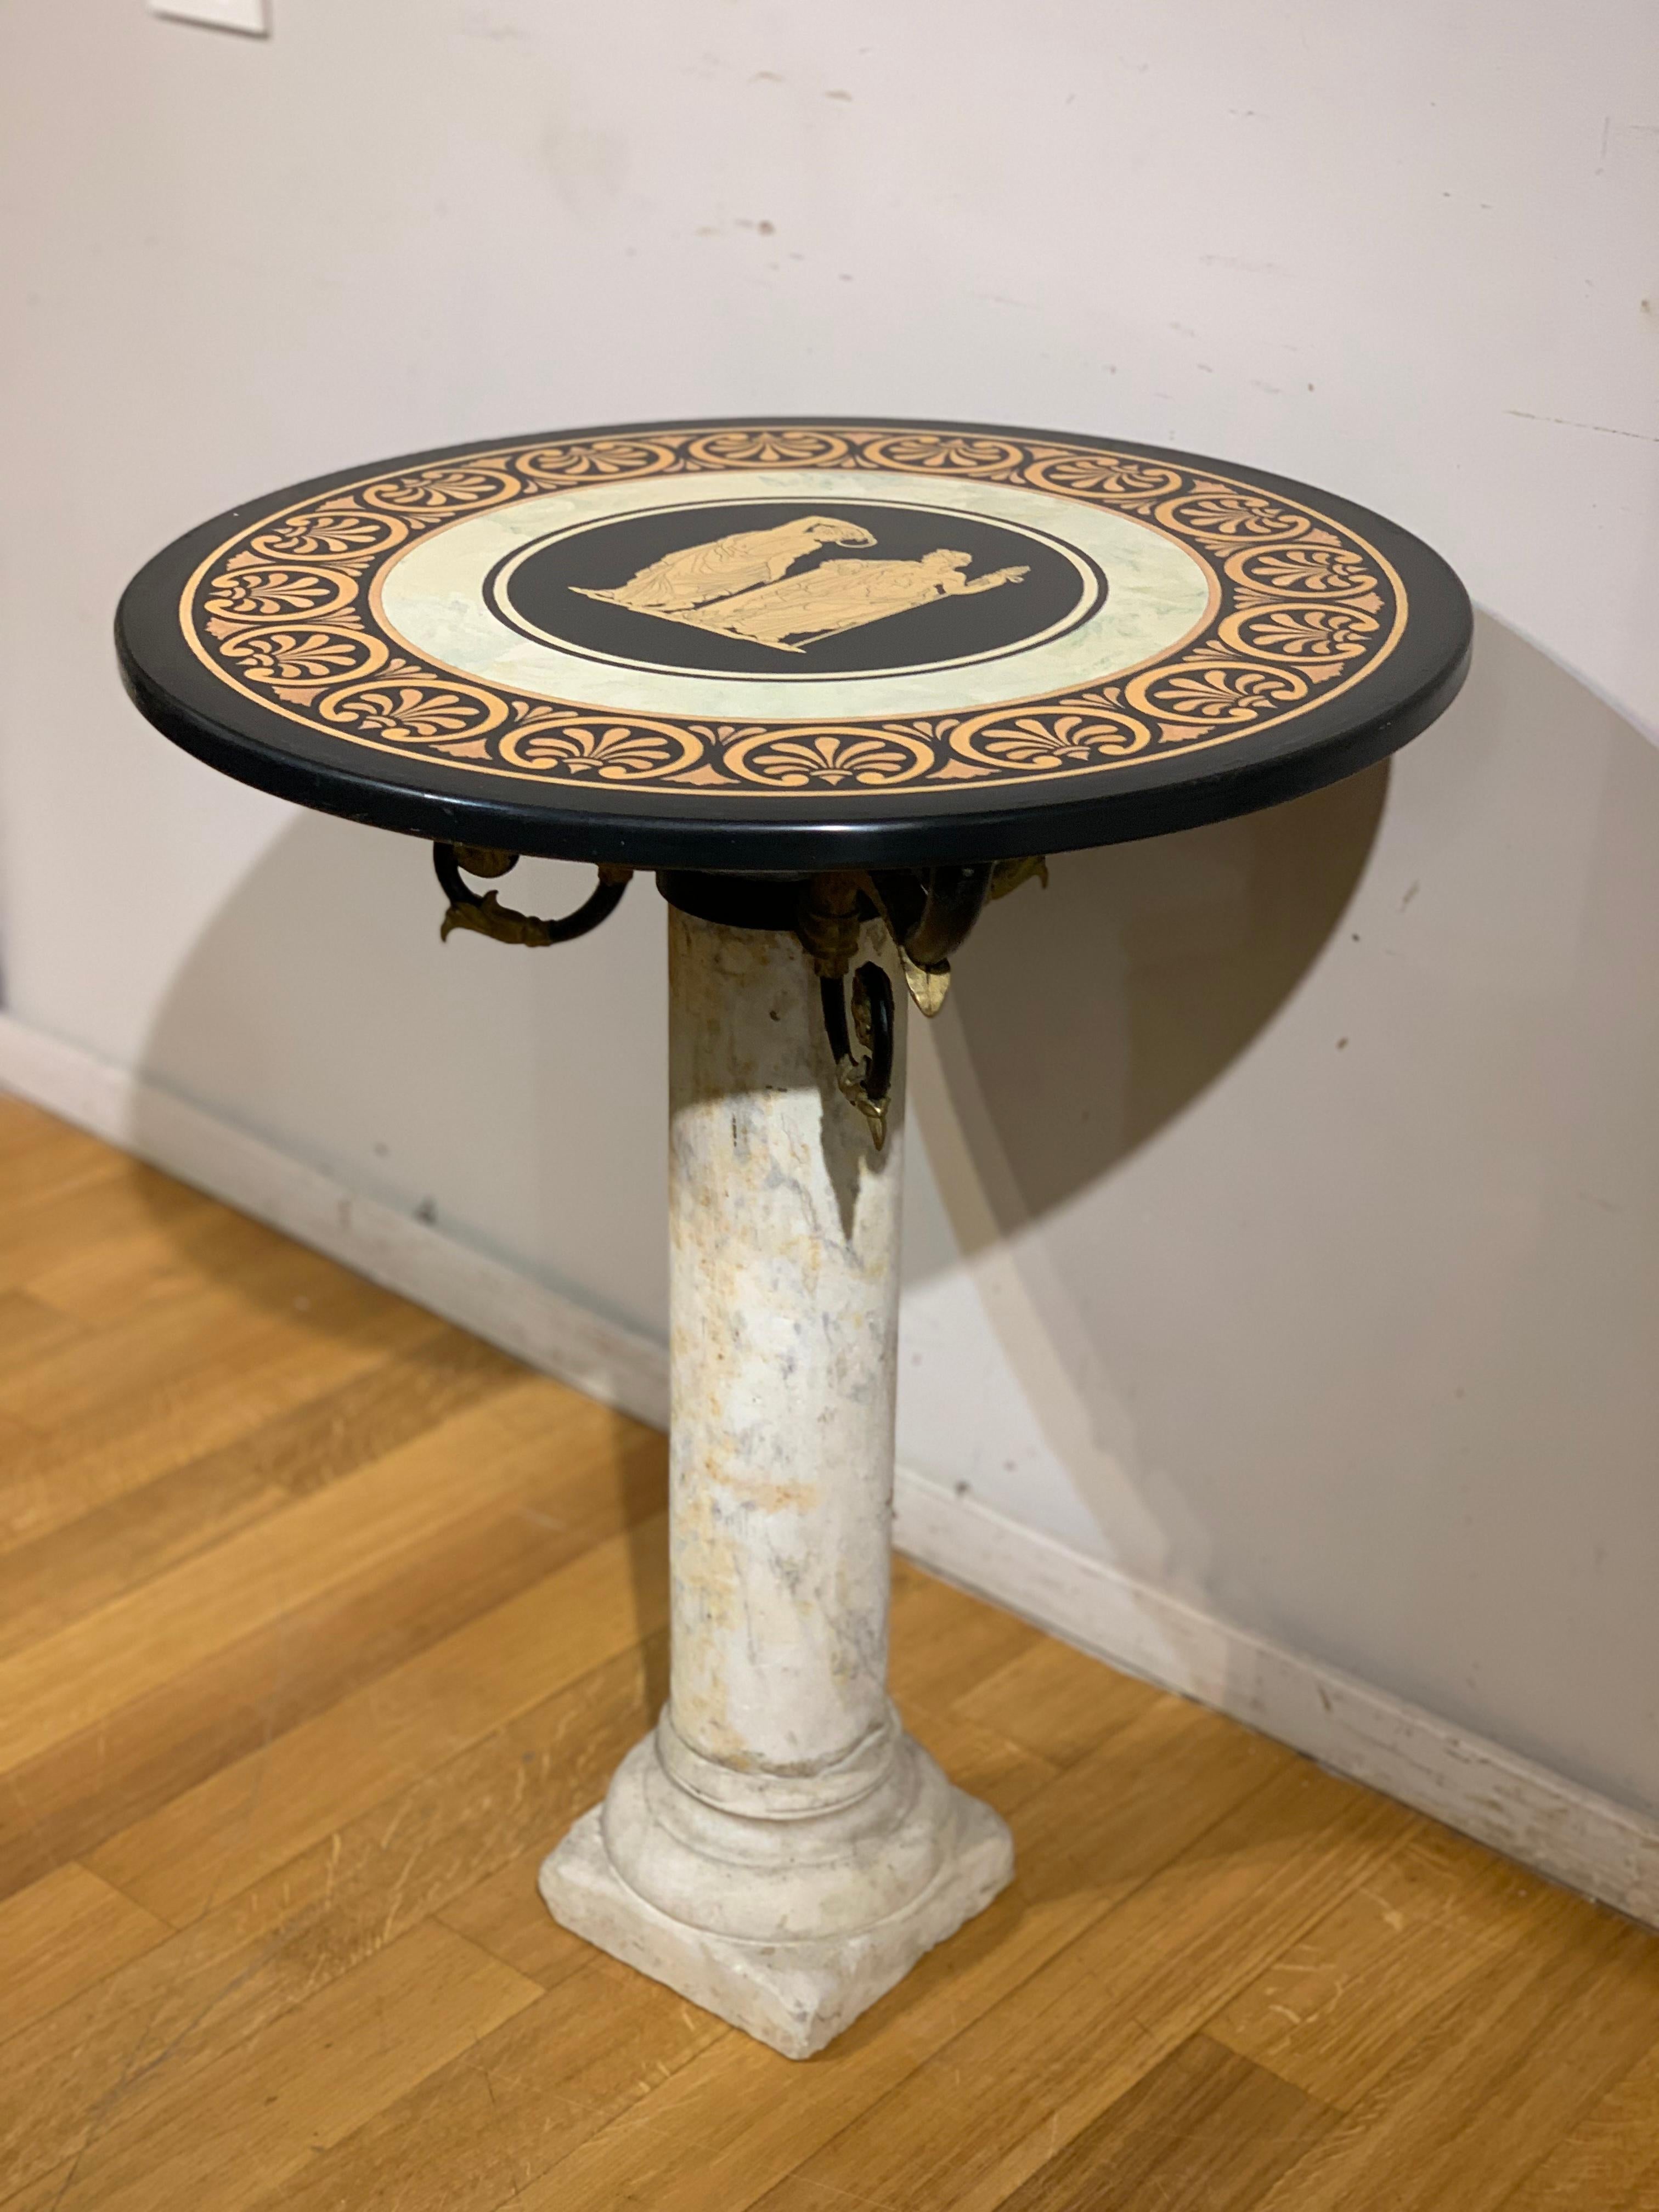 Late 19th Century Neoclassical Small Round Table in Carrara Marble and Scagliola For Sale 4